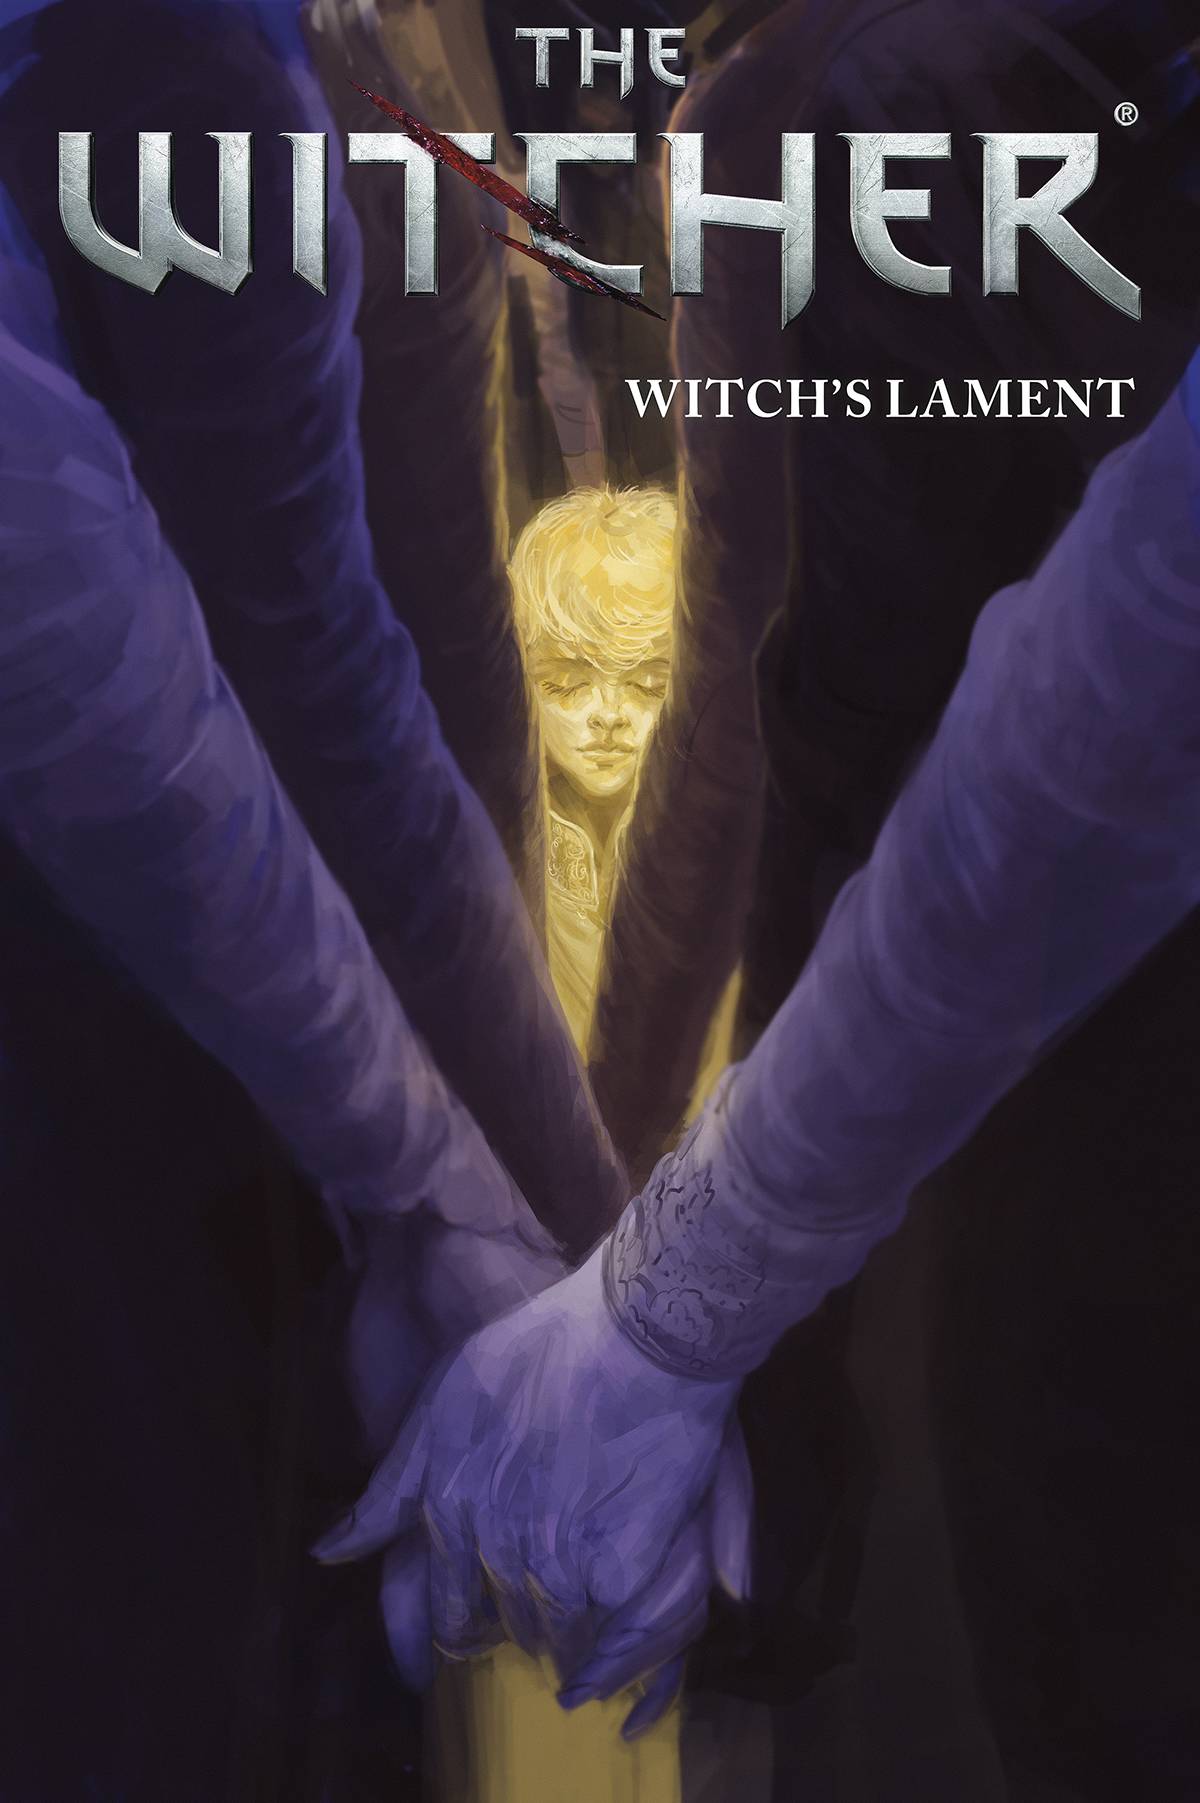 WITCHER WITCHS LAMENT